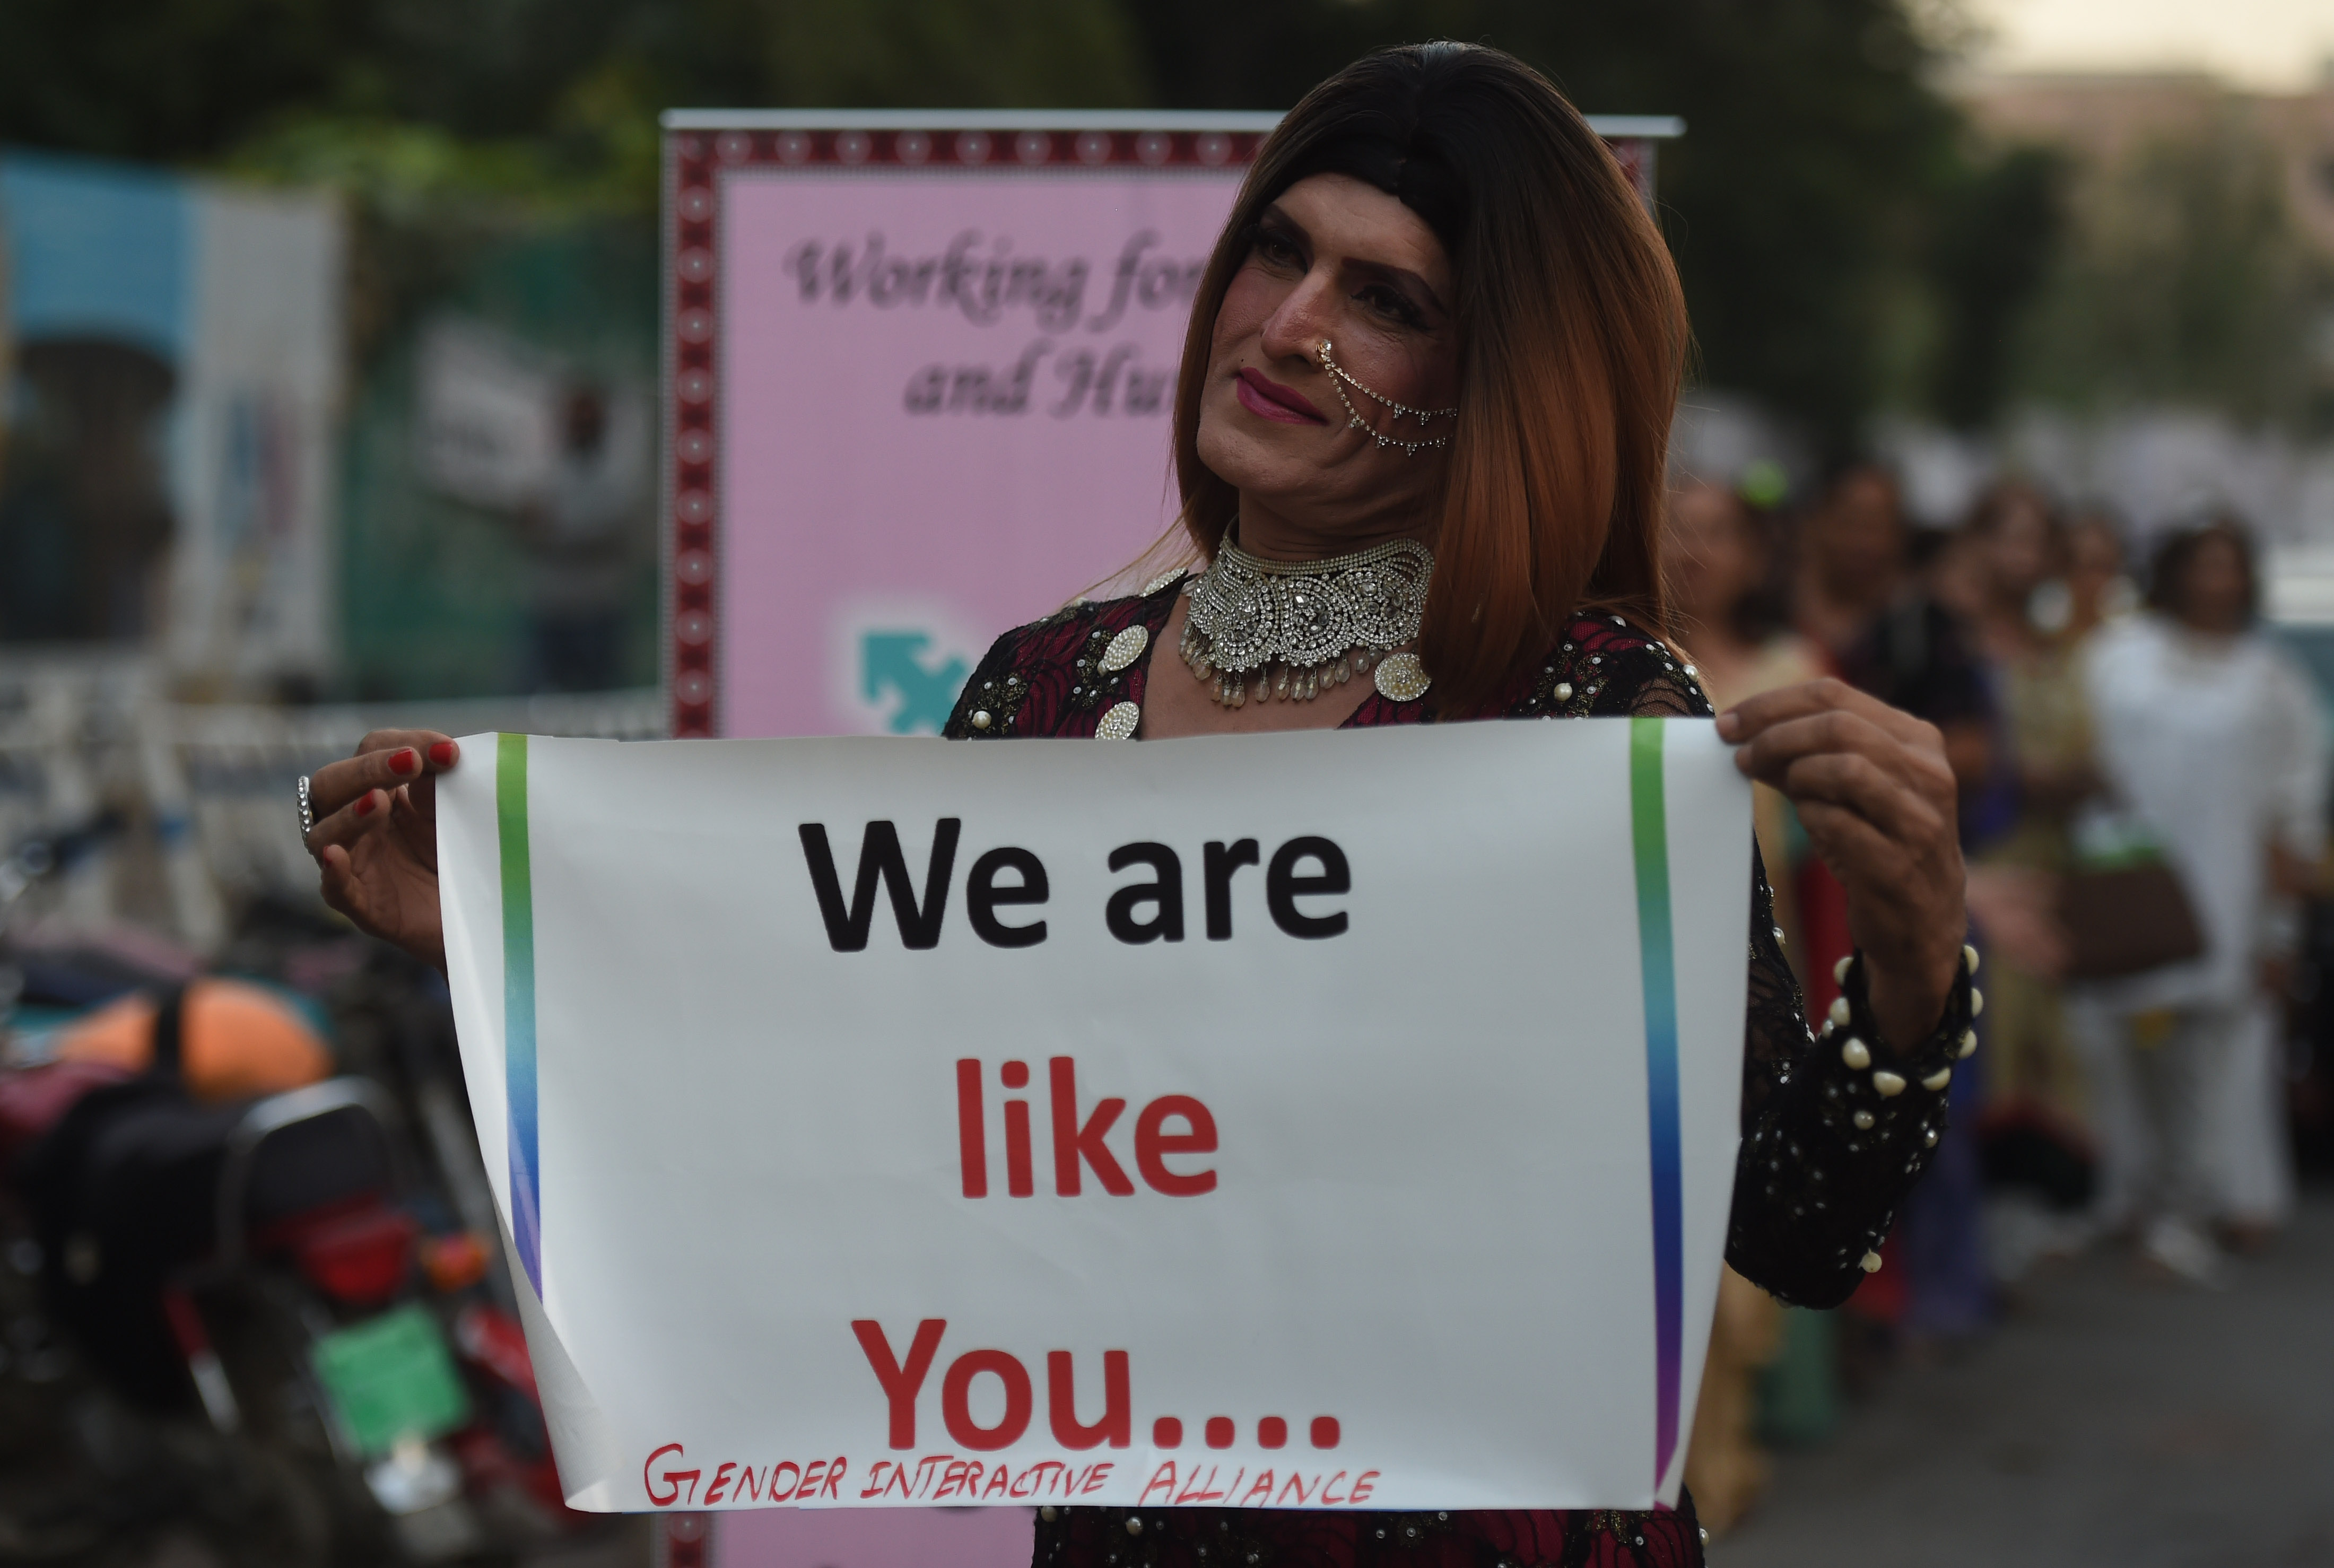 A Pakistani transgender activist poses for a photograph as they take part in a demonstration in Karachi on Nov. 20, 2017. (Asif Hassan—AFP/Getty Images)